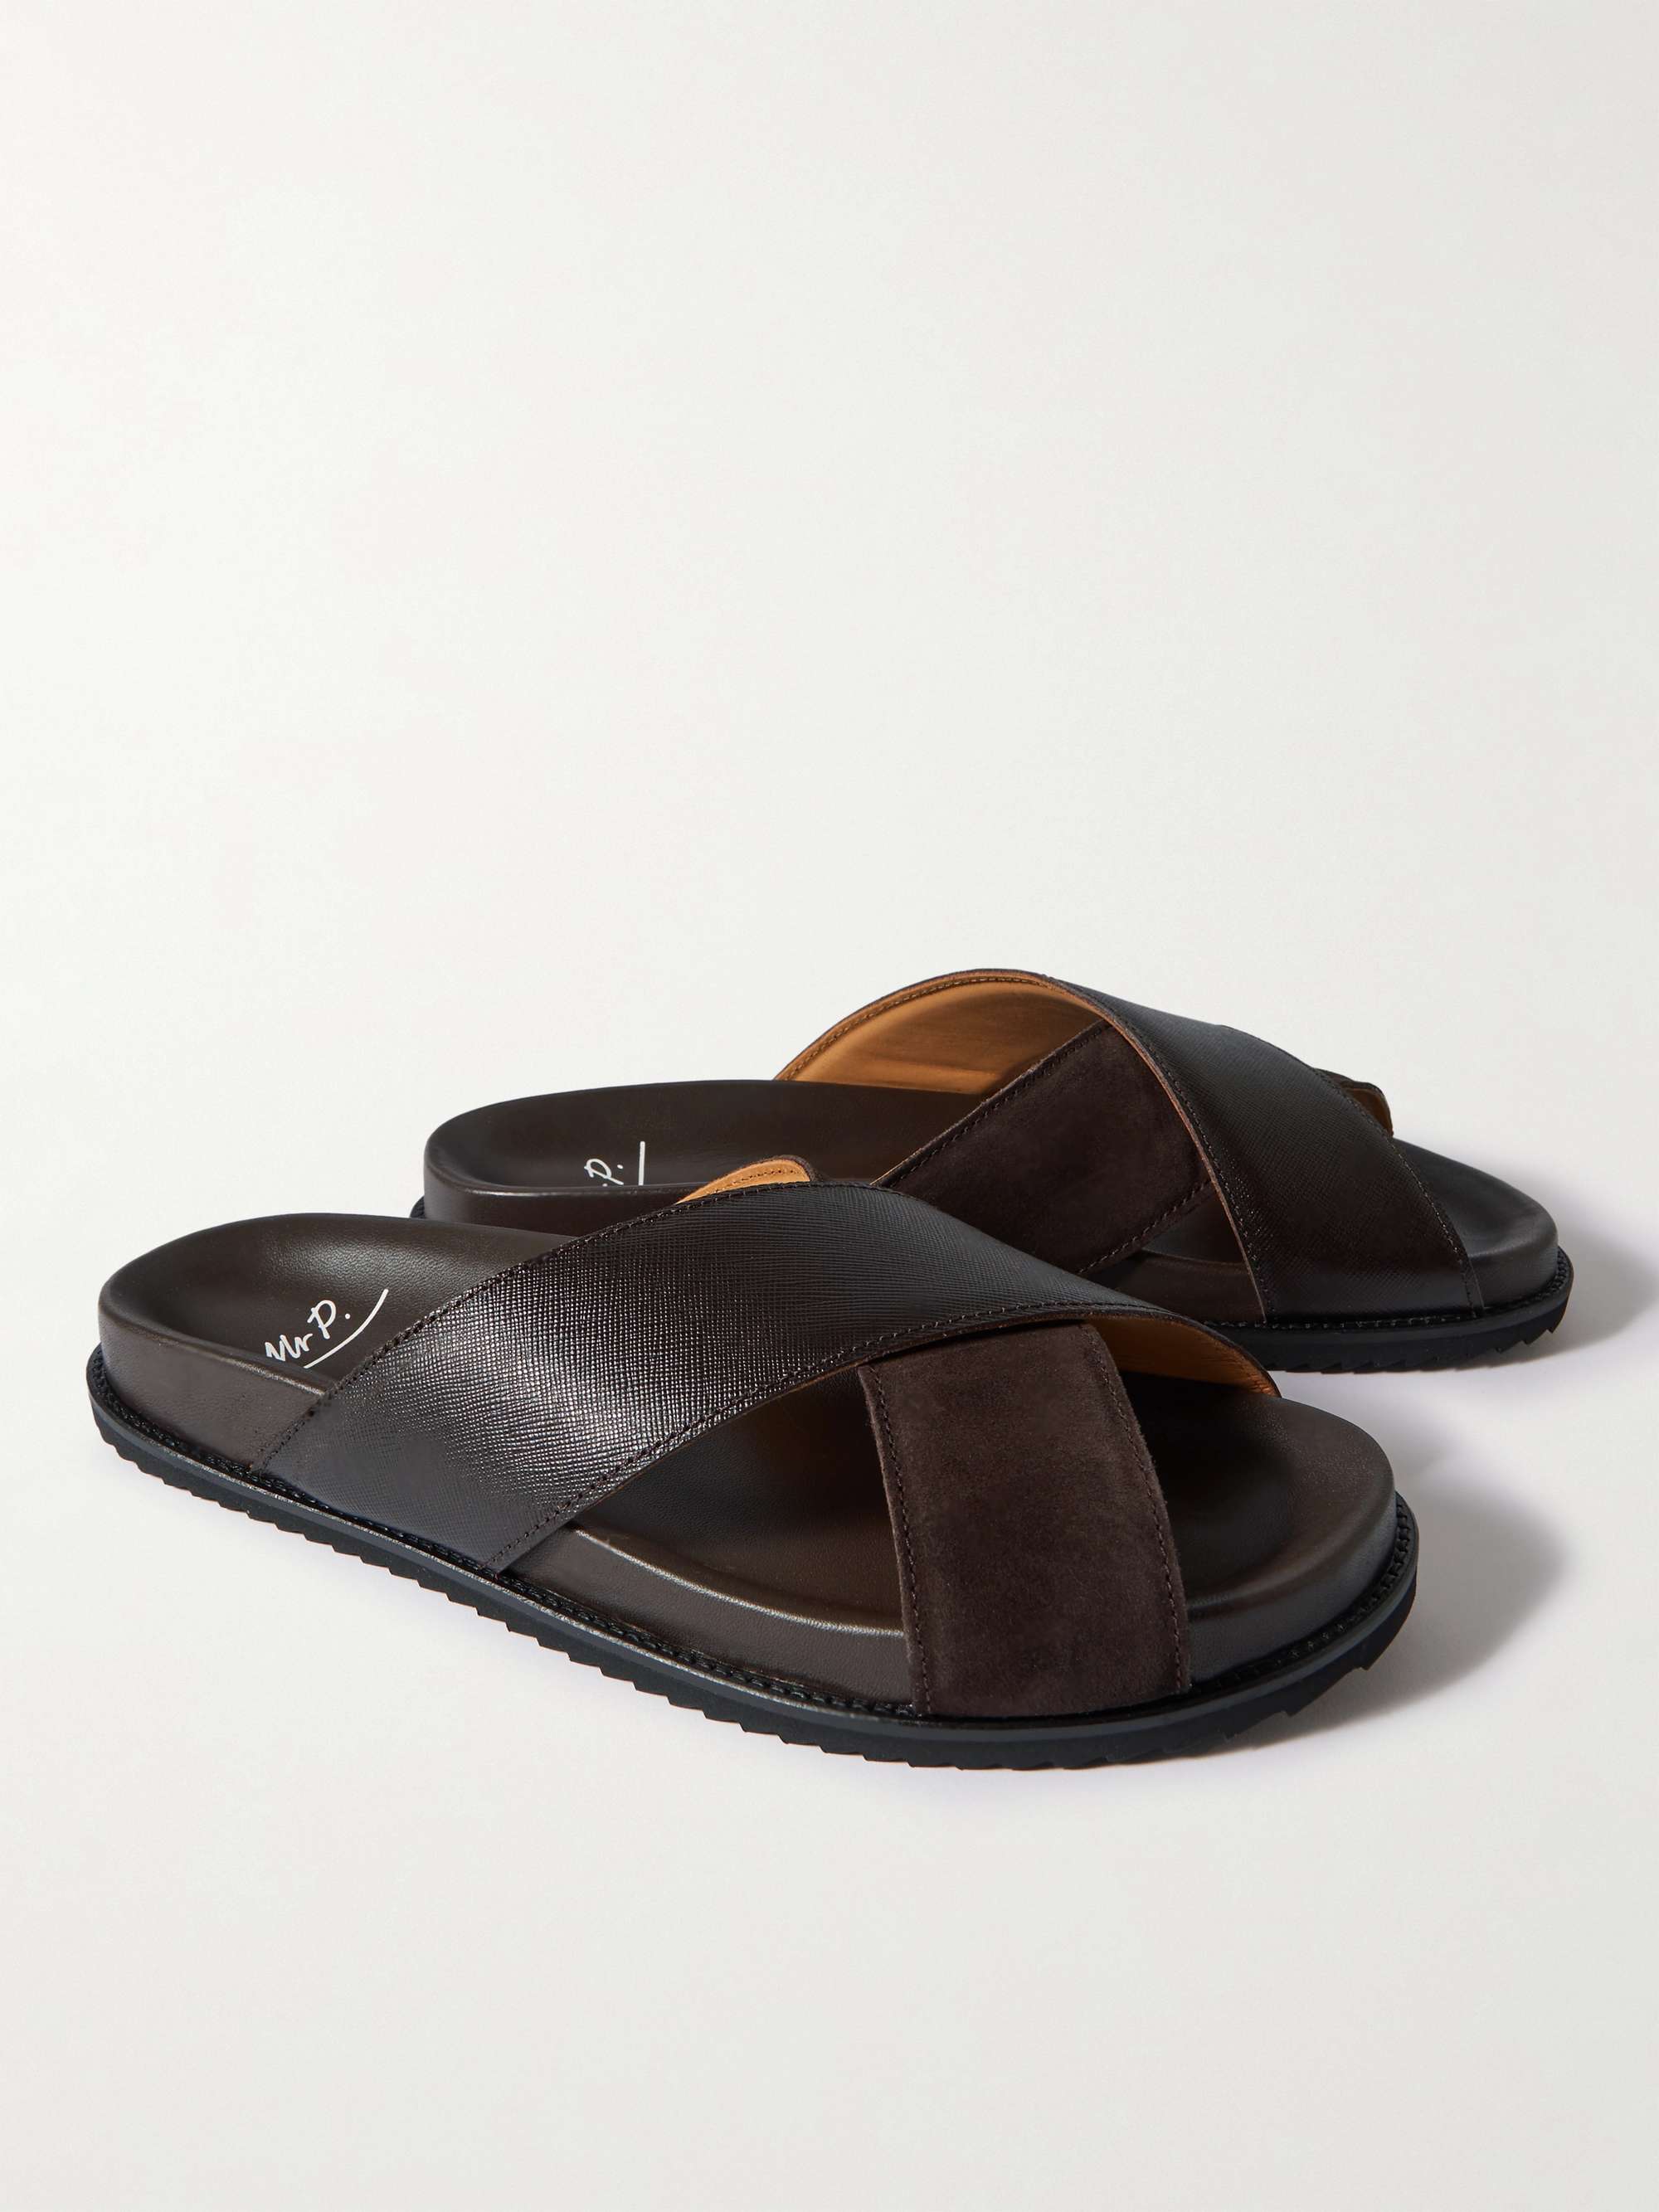 MR P. David Cross-Grain Leather and Suede Sandals